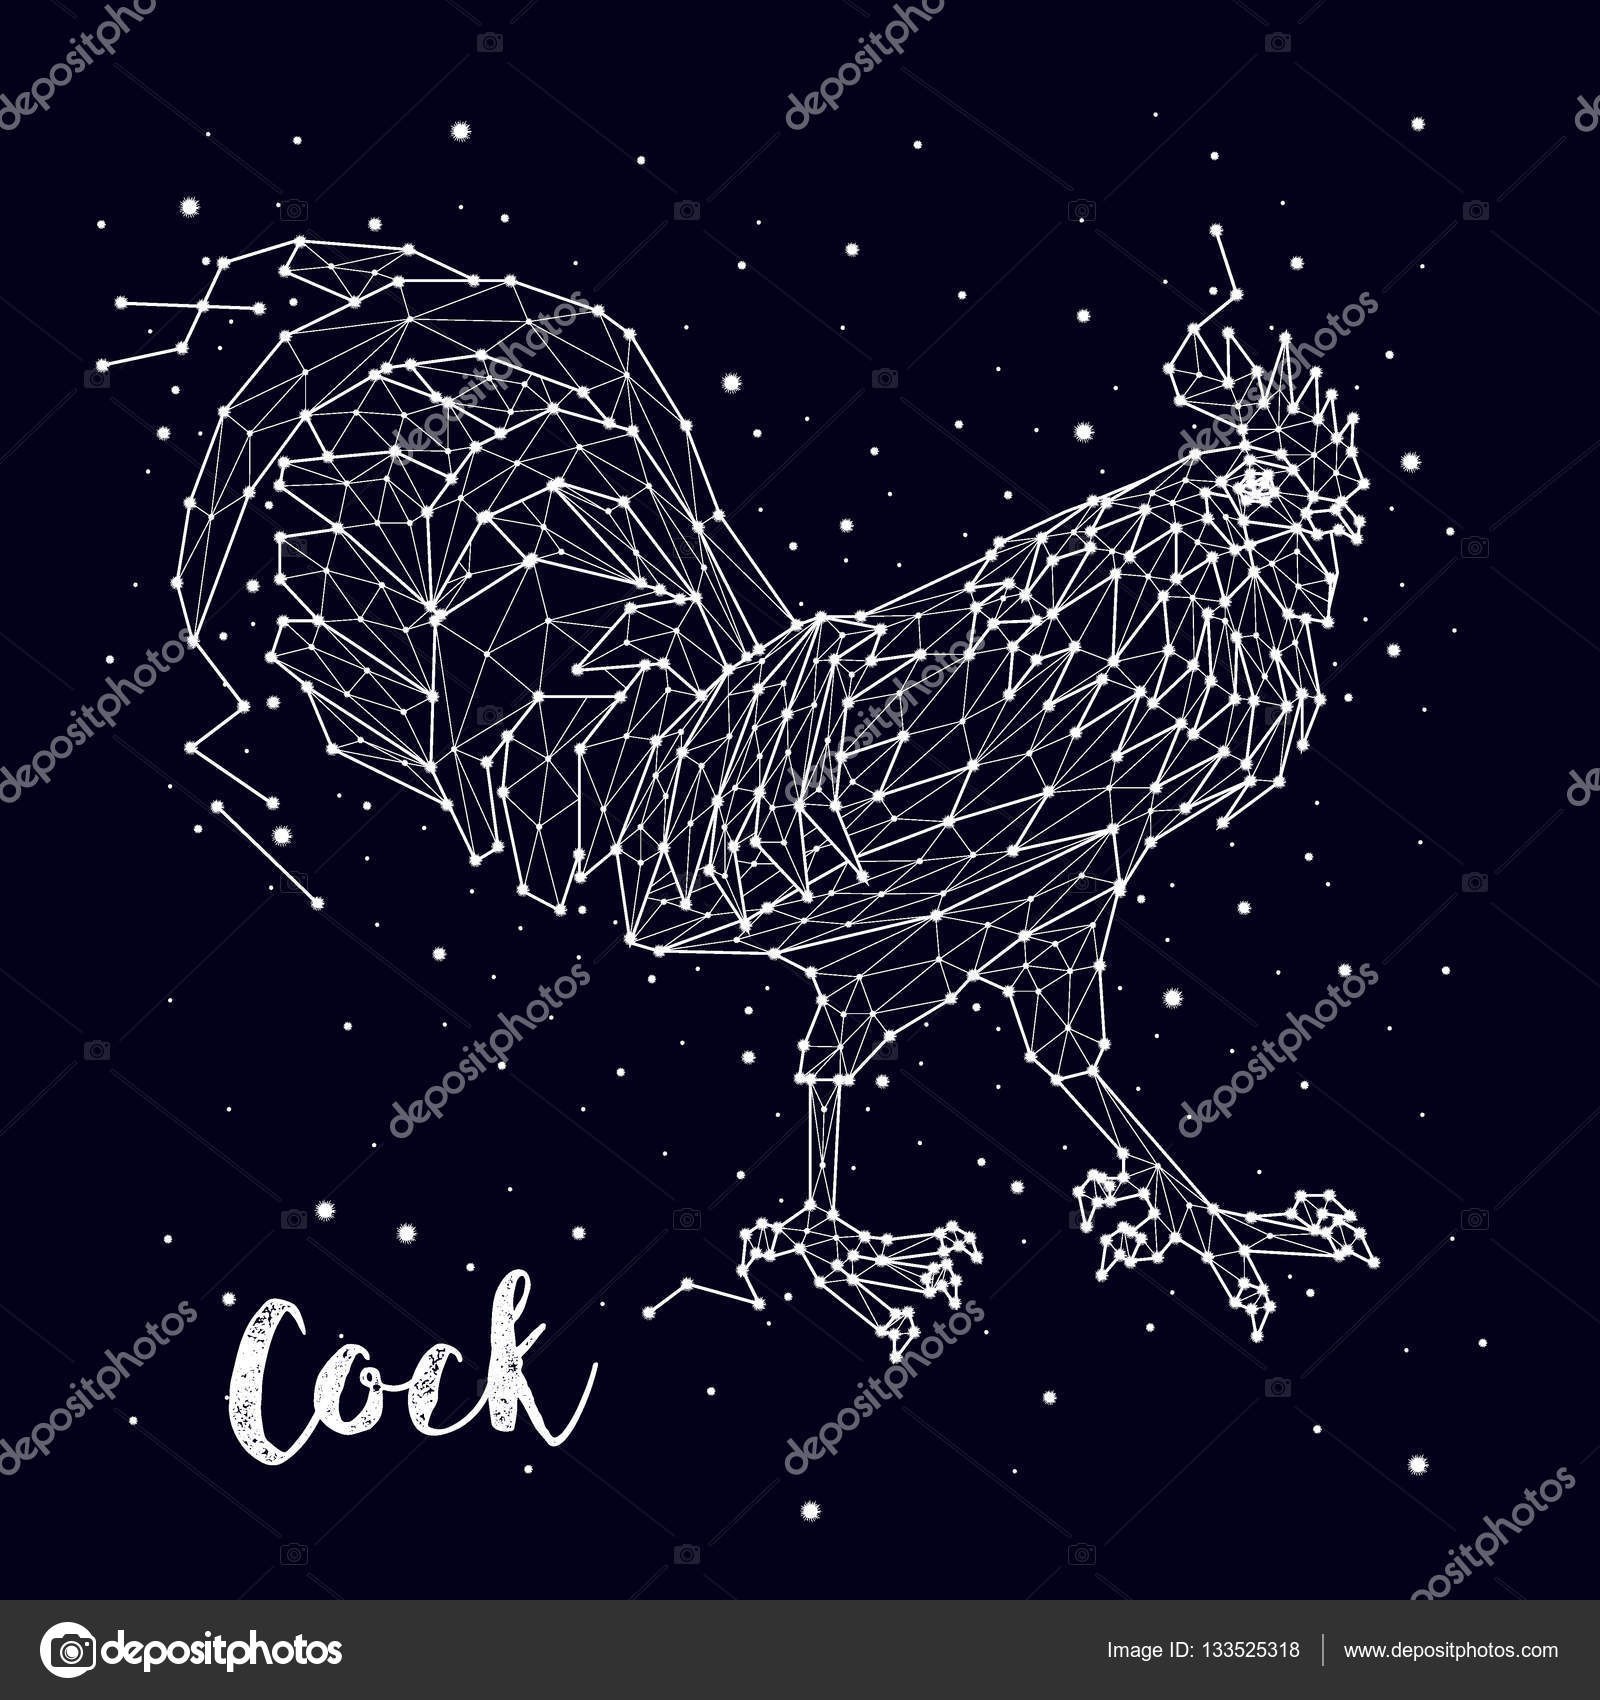 depositphotos_133525318-stock-illustration-cock-constellation-year-fire-rooster.jpg